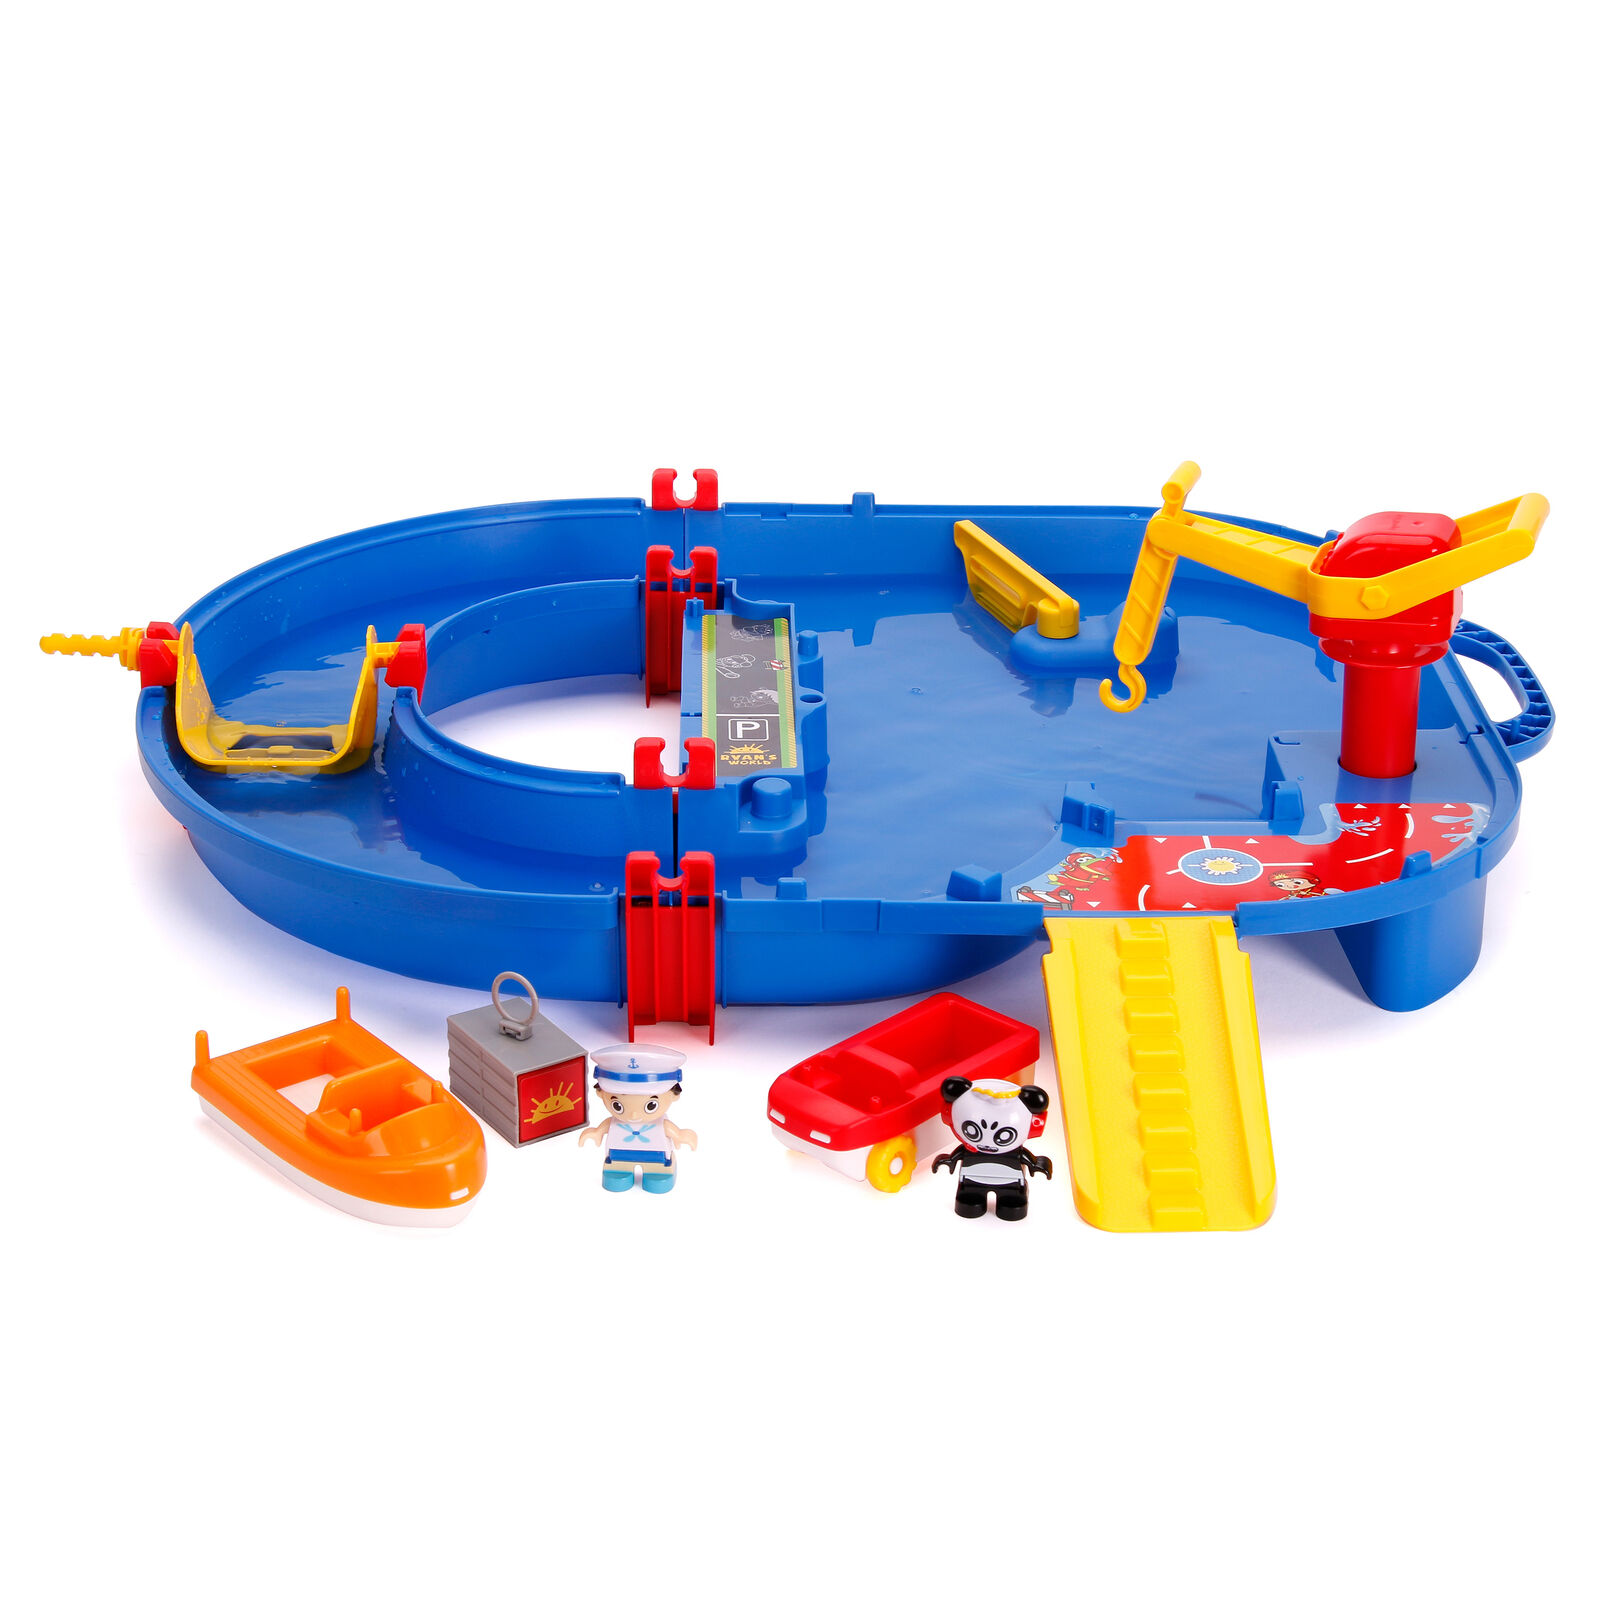 AquaPlay - Ryan's World Playset, Indoor and Outdoor Water Toy, Red and Blue